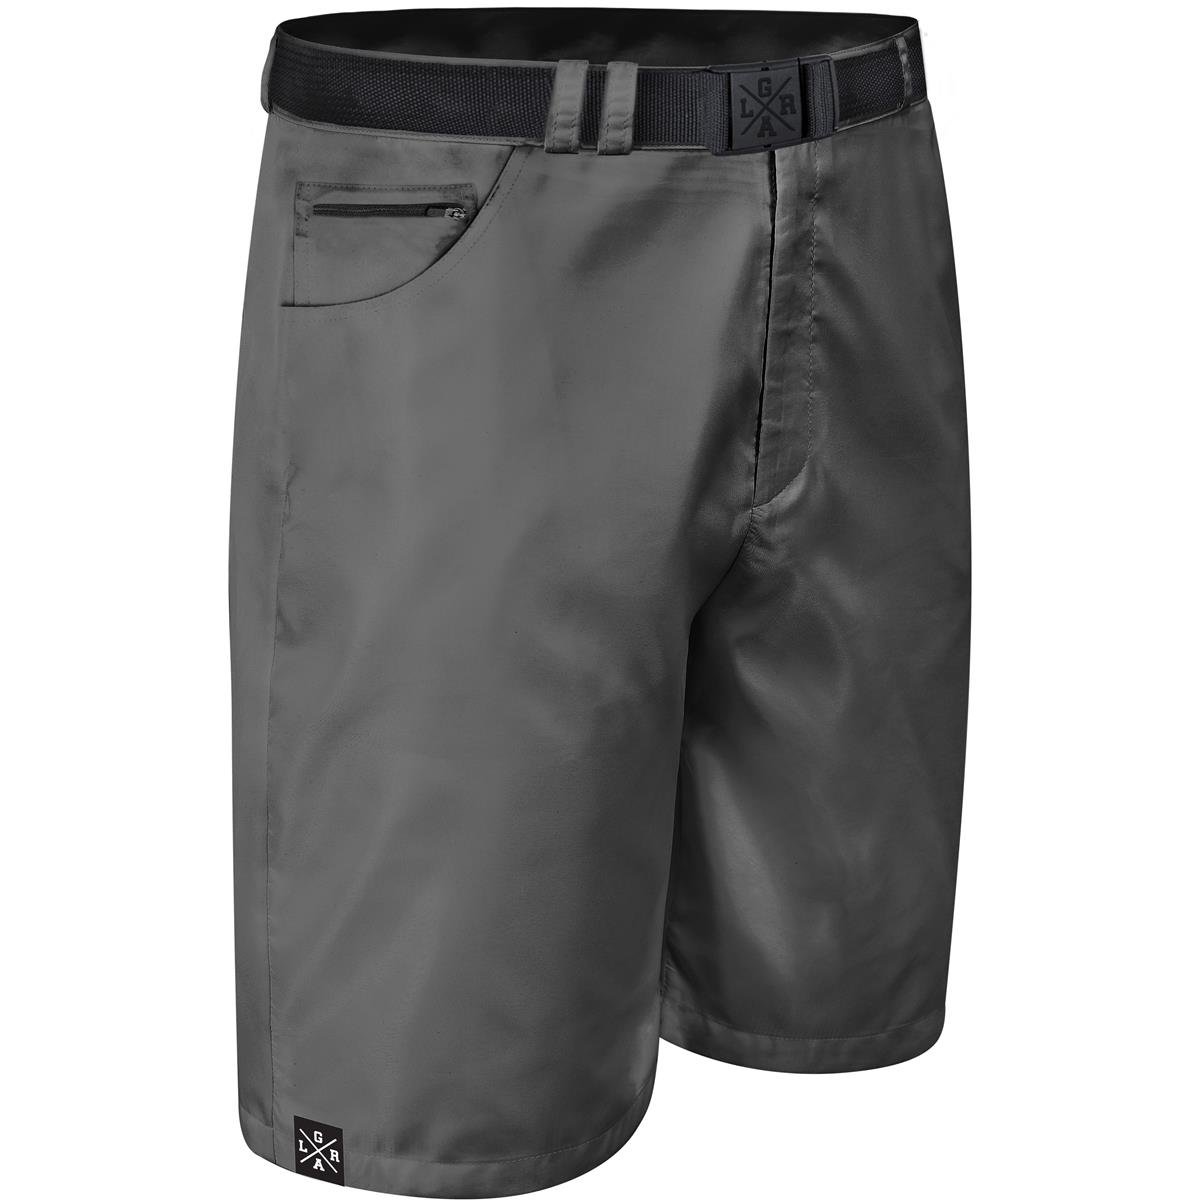 Loose Riders Shorts VTT Sessions Gris